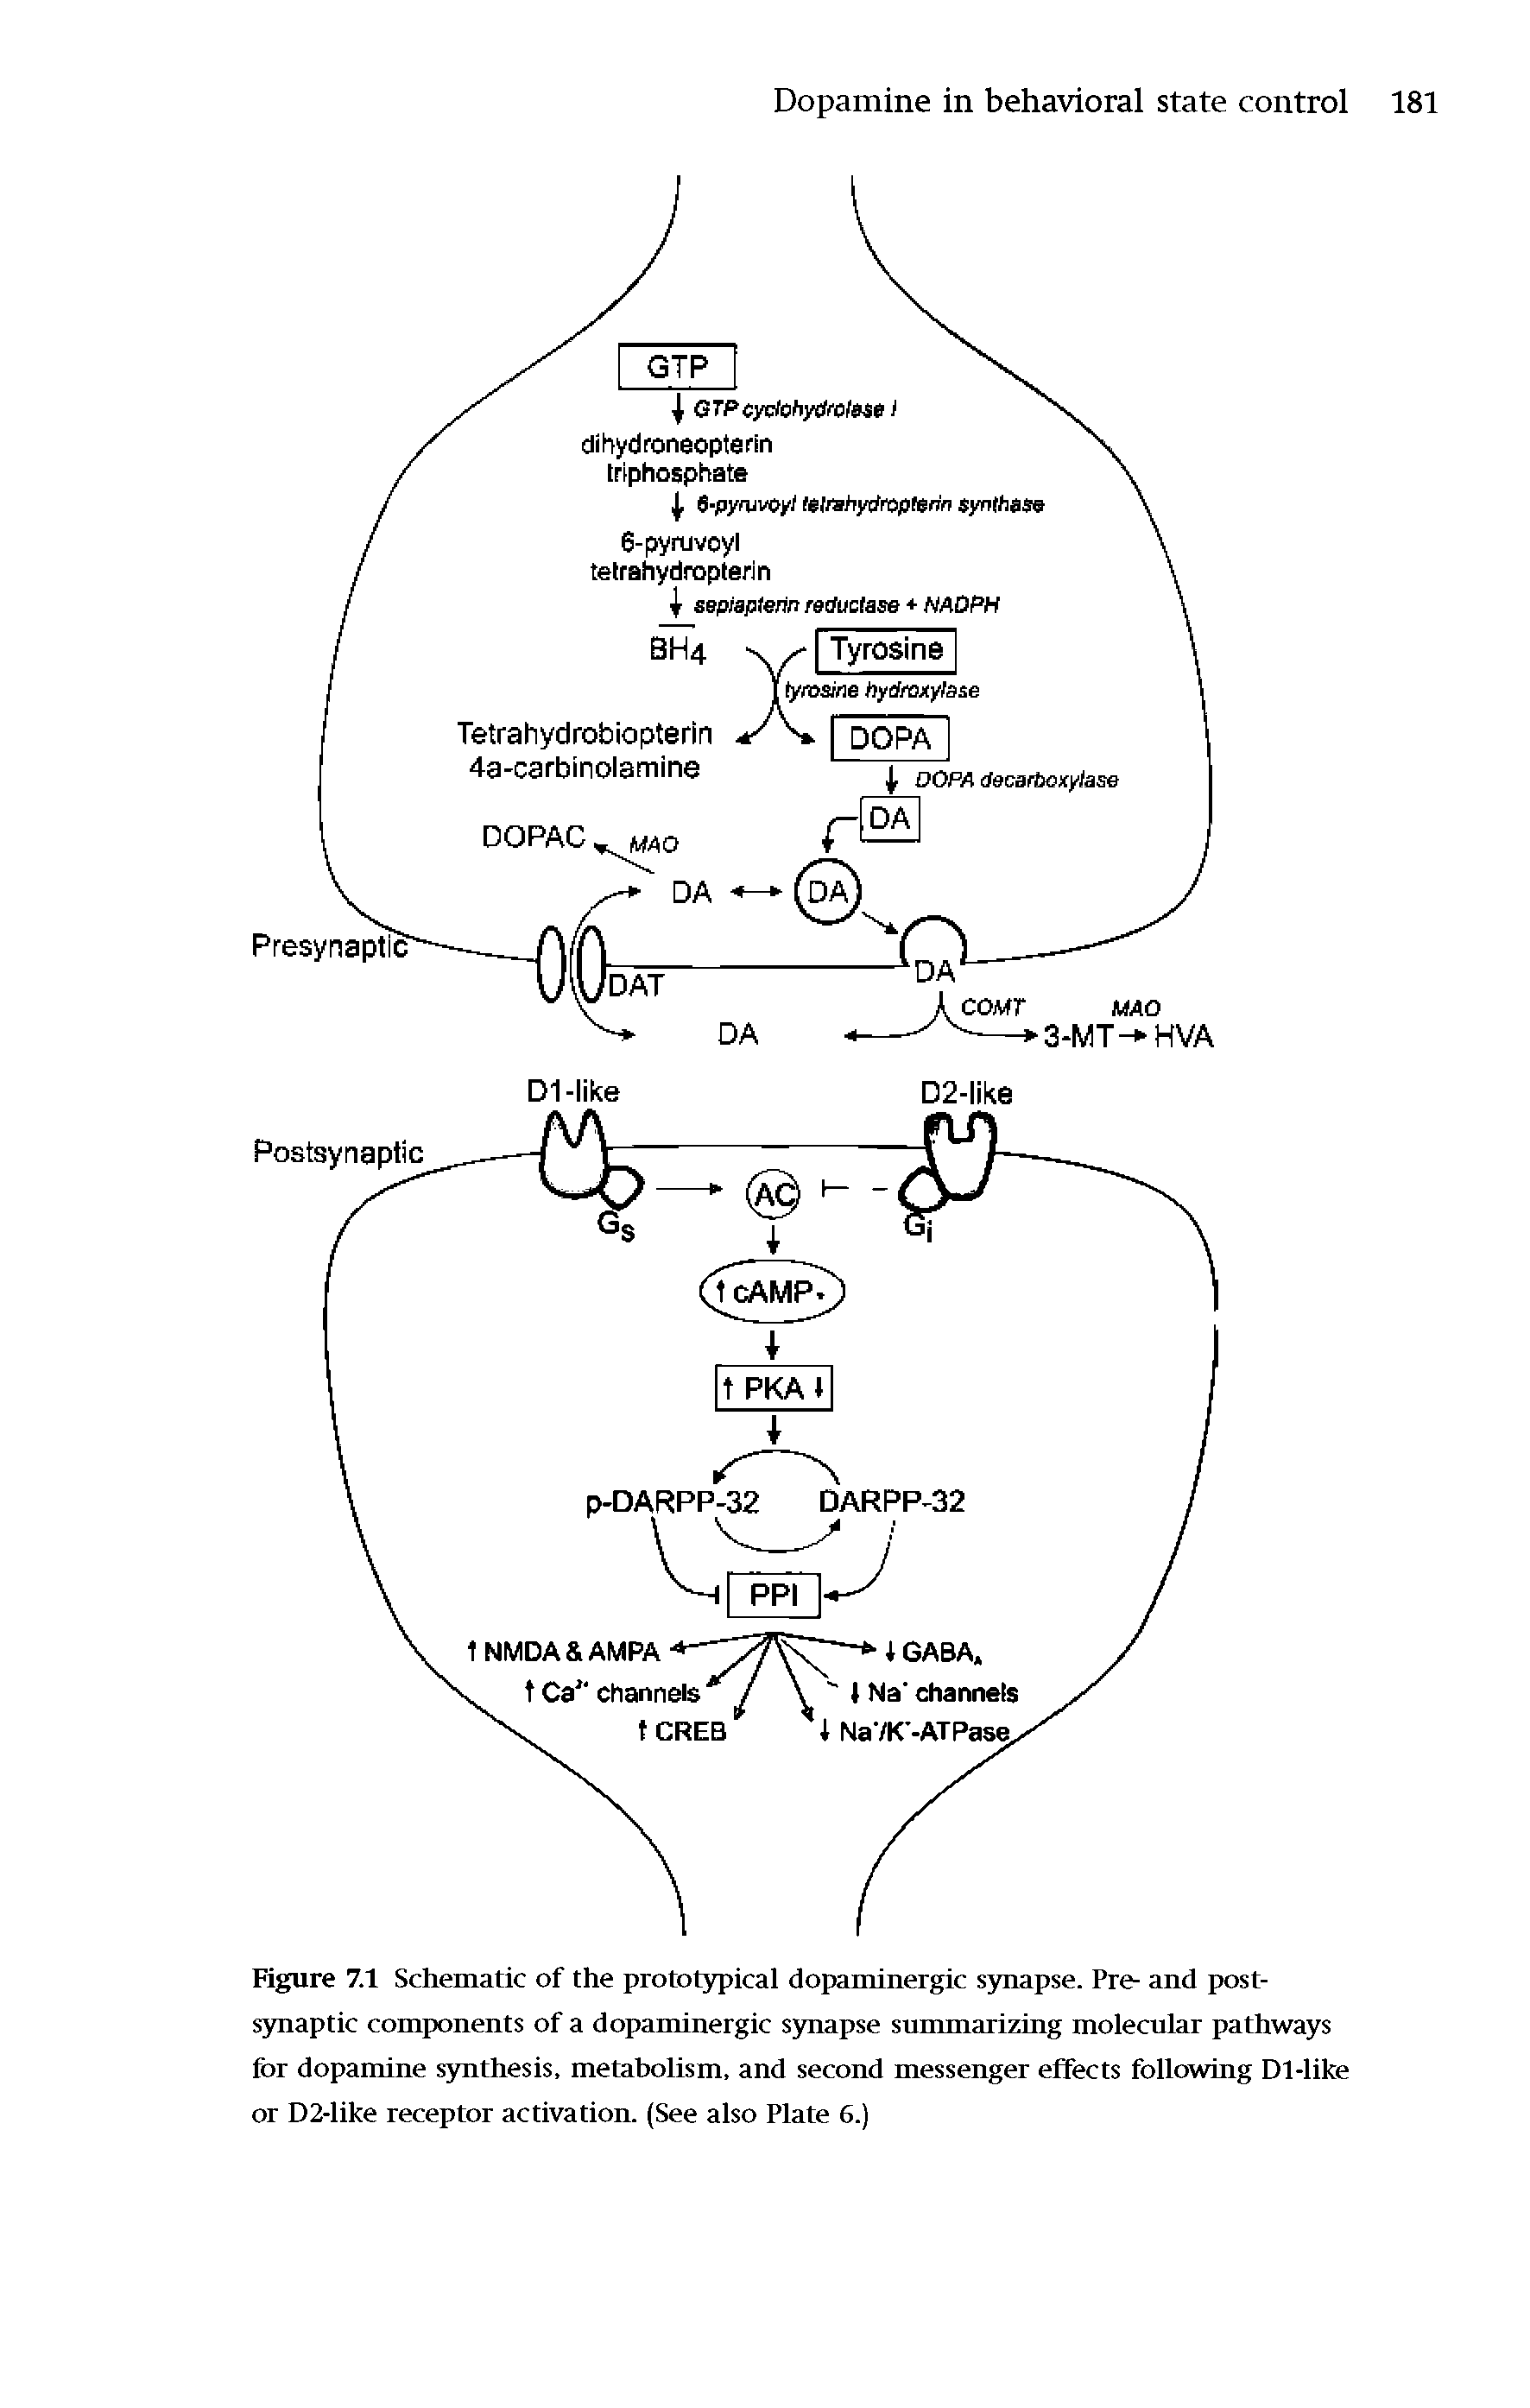 Figure 7.1 Schematic of the prototypical dopaminergic synapse. Pre- and post-synaptic components of a dopaminergic synapse summarizing molecular pathways for dopamine synthesis, metabolism, and second messenger effects following Dl-like or D2-like receptor activation. (See also Plate 6.)...